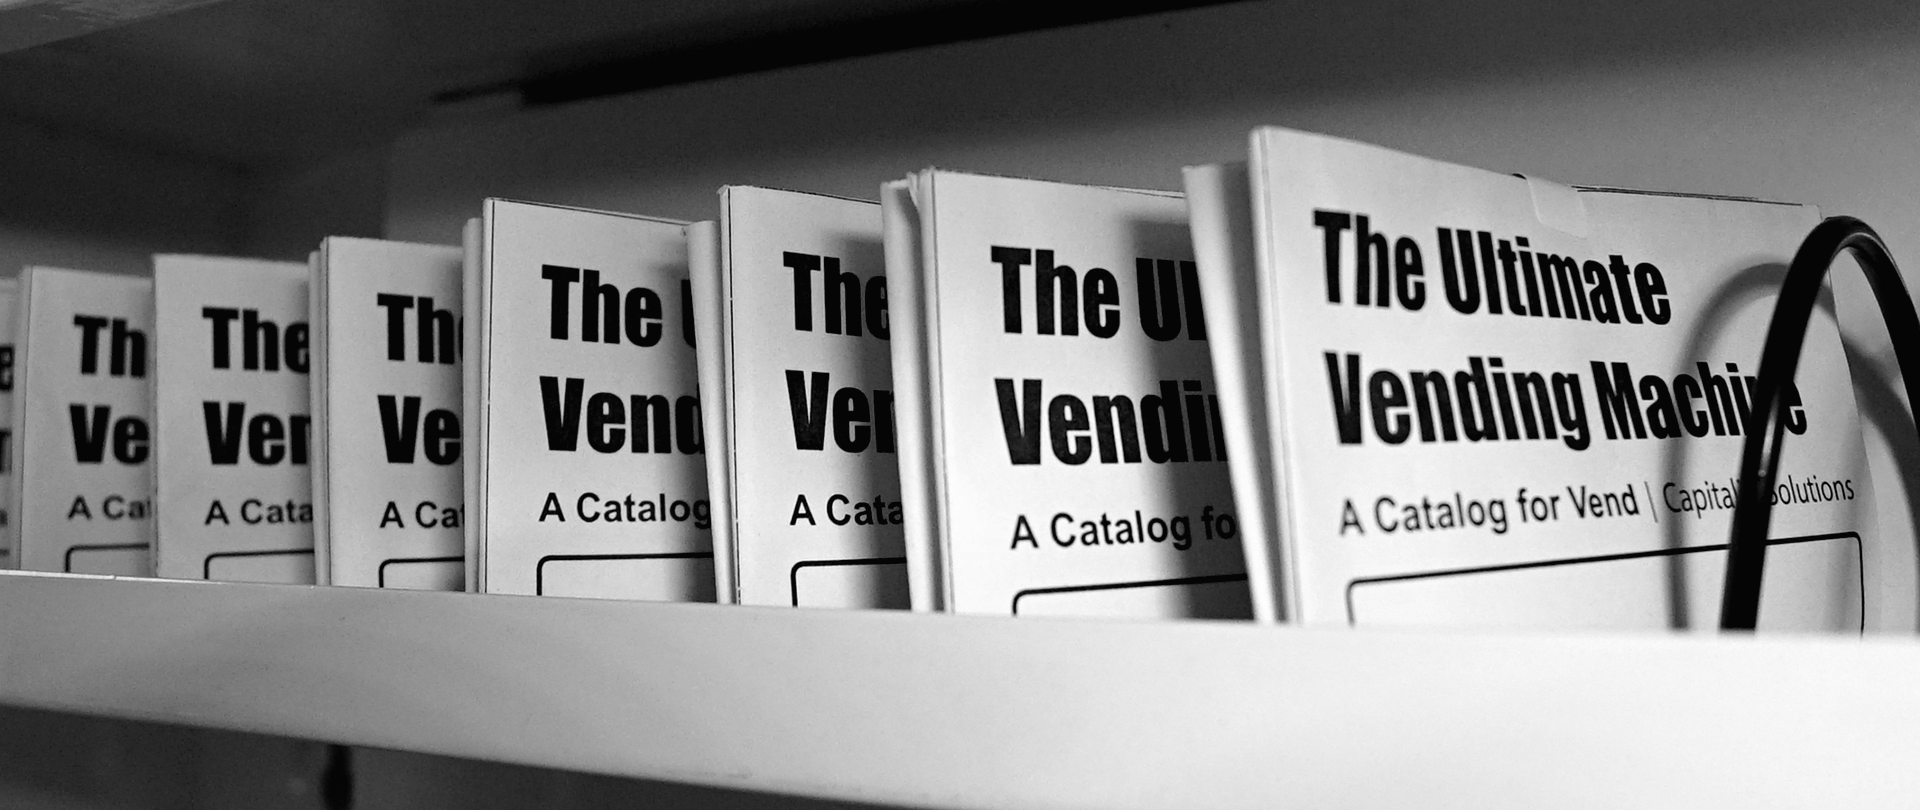 The Catalog Volume One on display in the row of the Ultimate Vending Machine. The Catalog are folded and organized for the display.